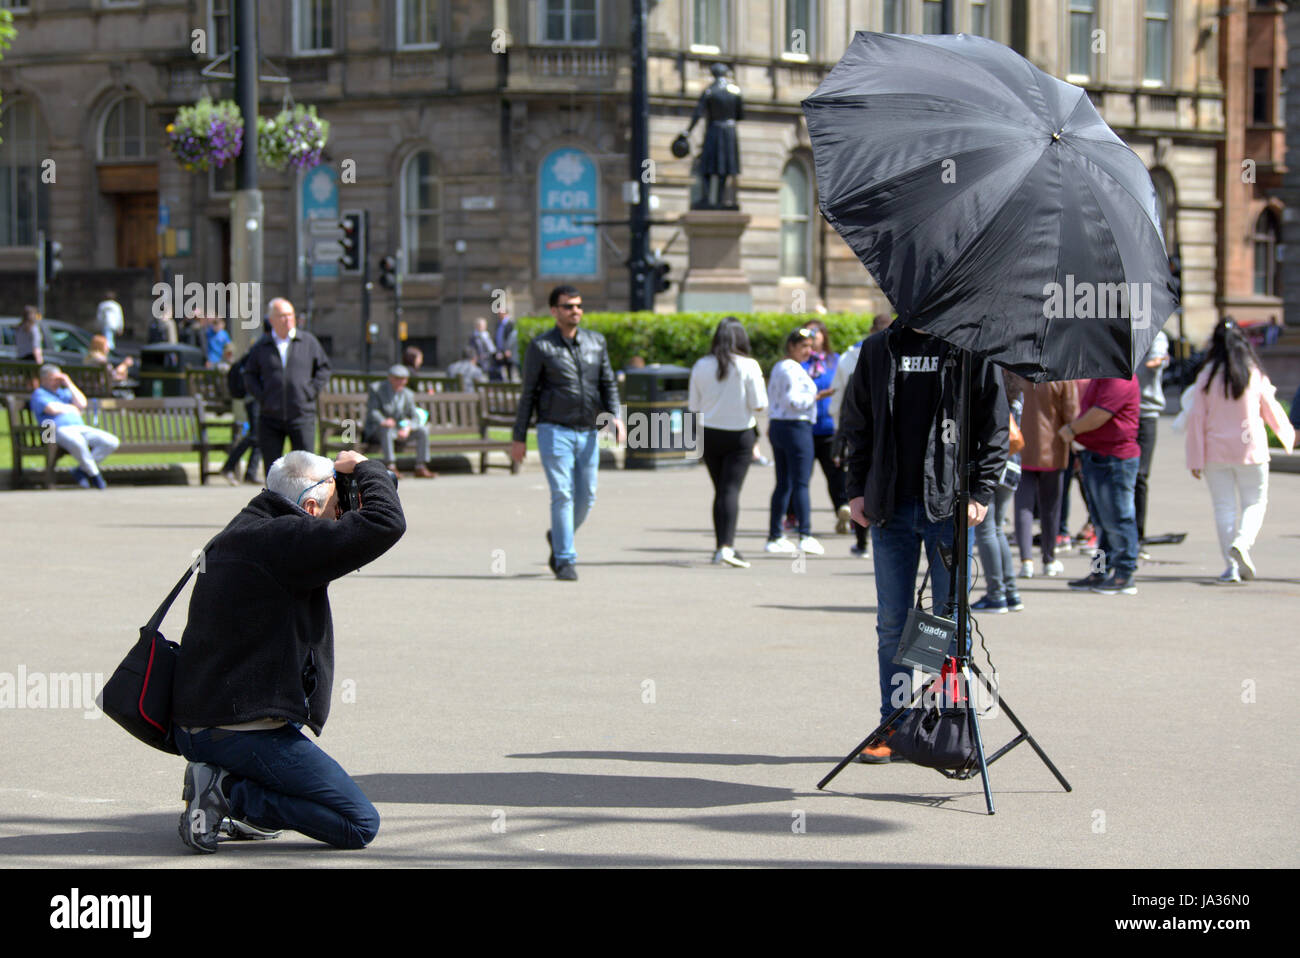 Professional photographer Murdo MacLeod of the Guardian newspaper   working in public place George Square Glasgow Stock Photo